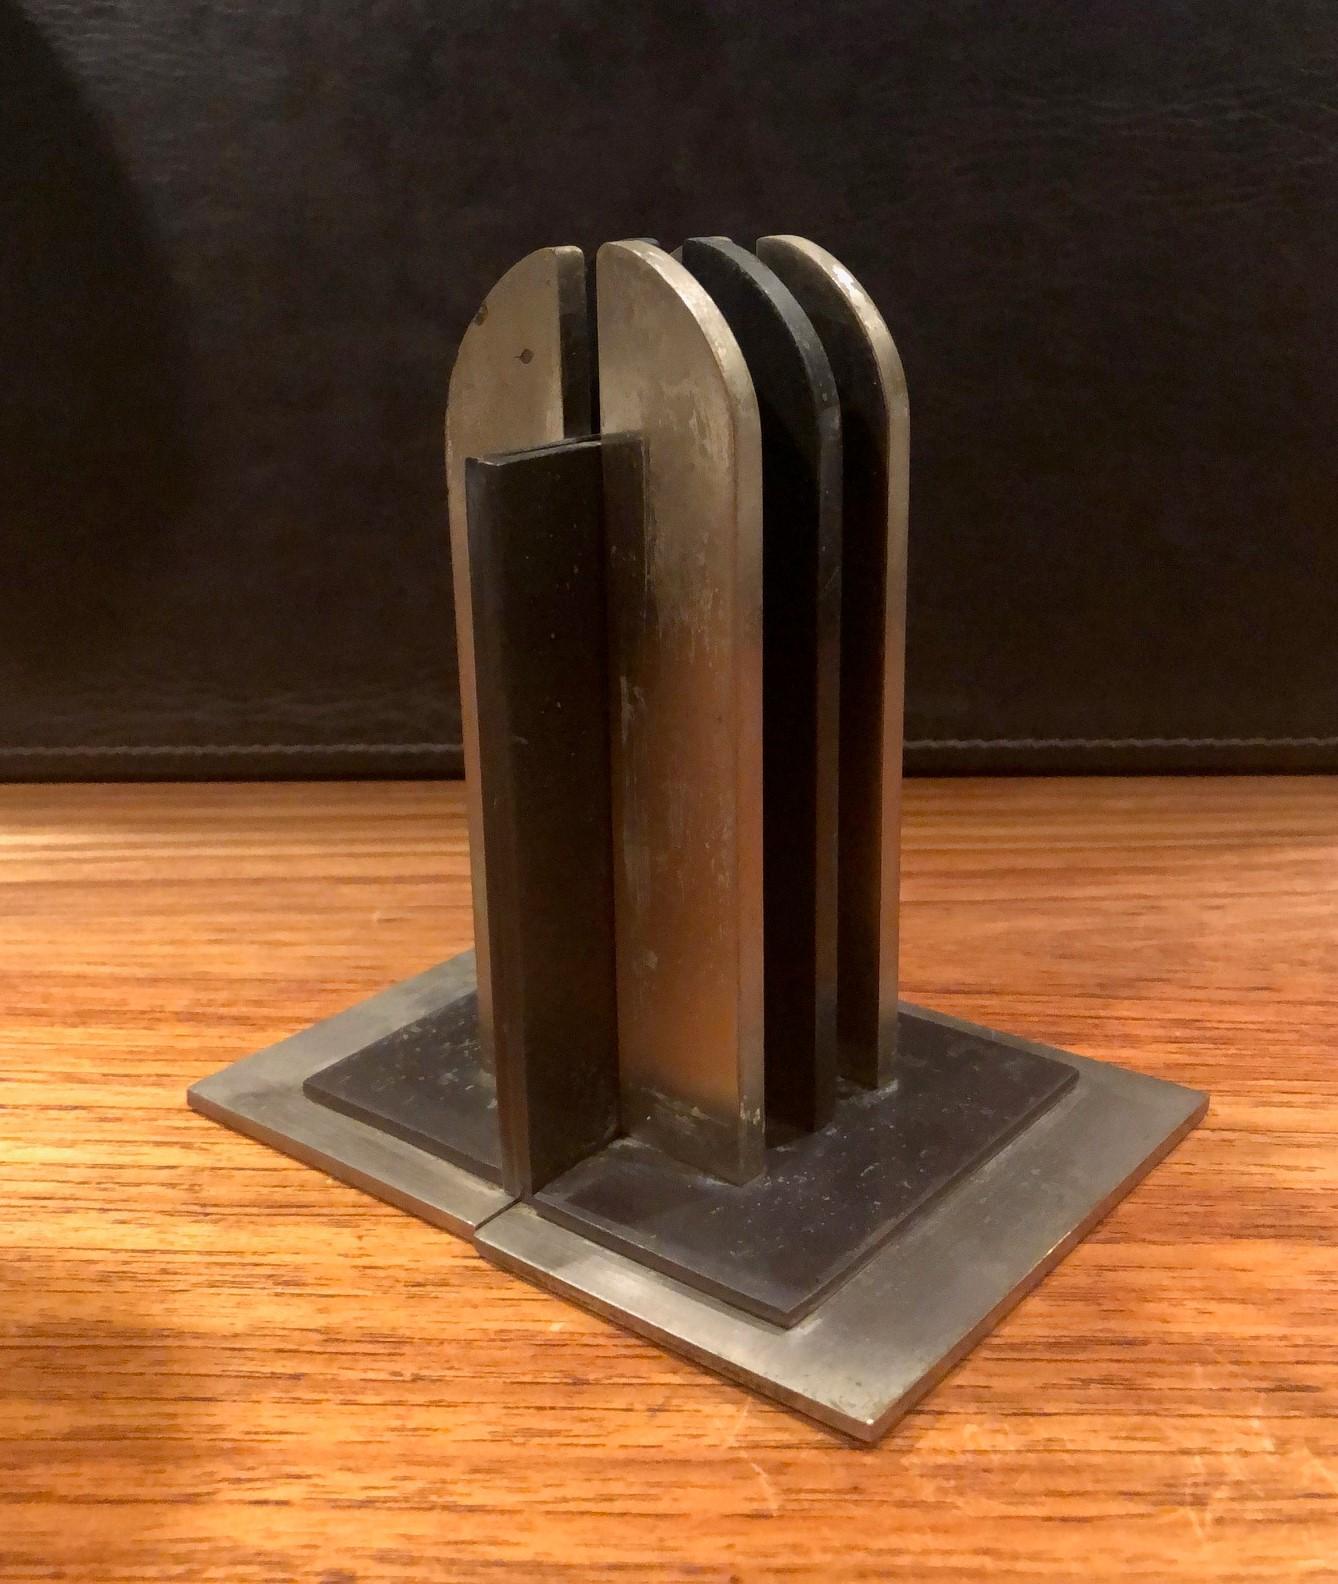 20th Century Pair of Machine Age Art Deco Bookends by Walter Von Nessen for Chase & Co. No